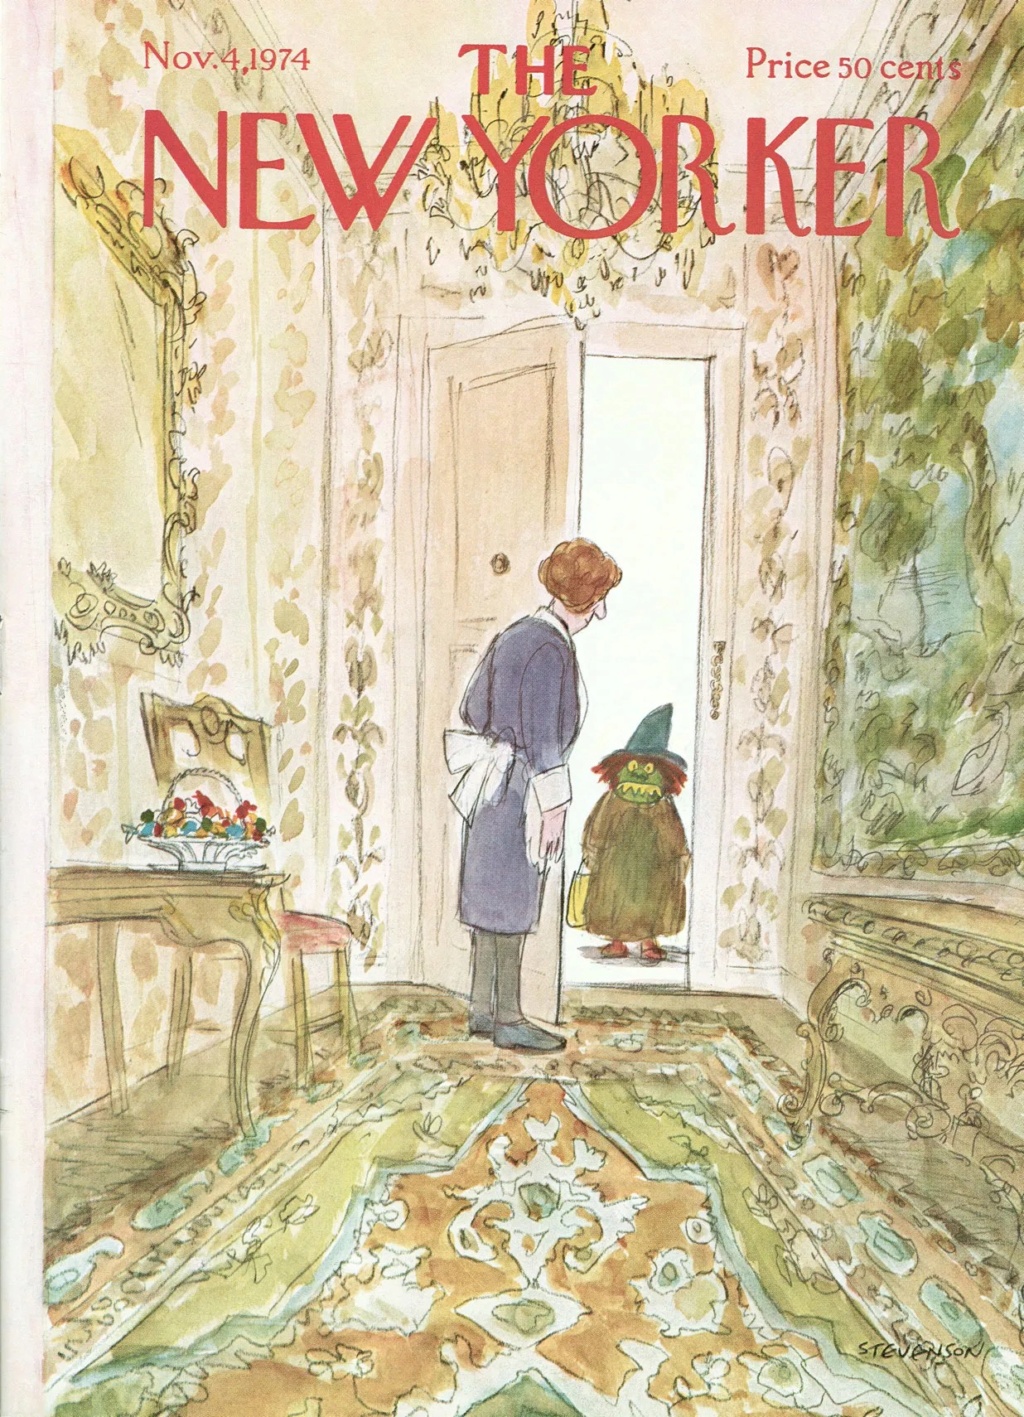 The New Yorker : Les couvertures - Page 2 Hallow14